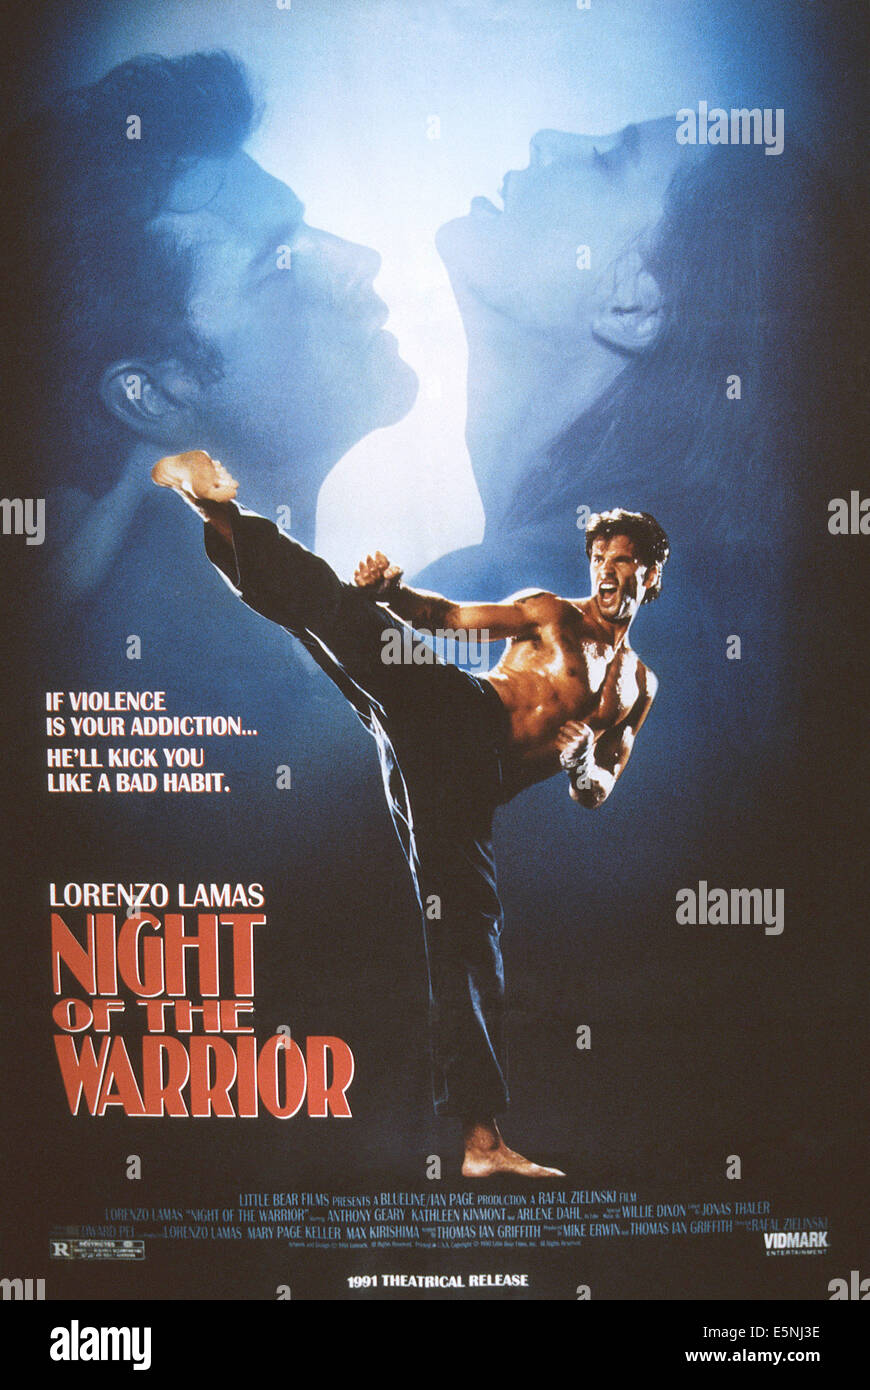 NIGHT OF THE WARRIOR, US poster, Lorenzo Lamas, 1991. ©Trimark Pictures/courtesy Everett Collection Stock Photo